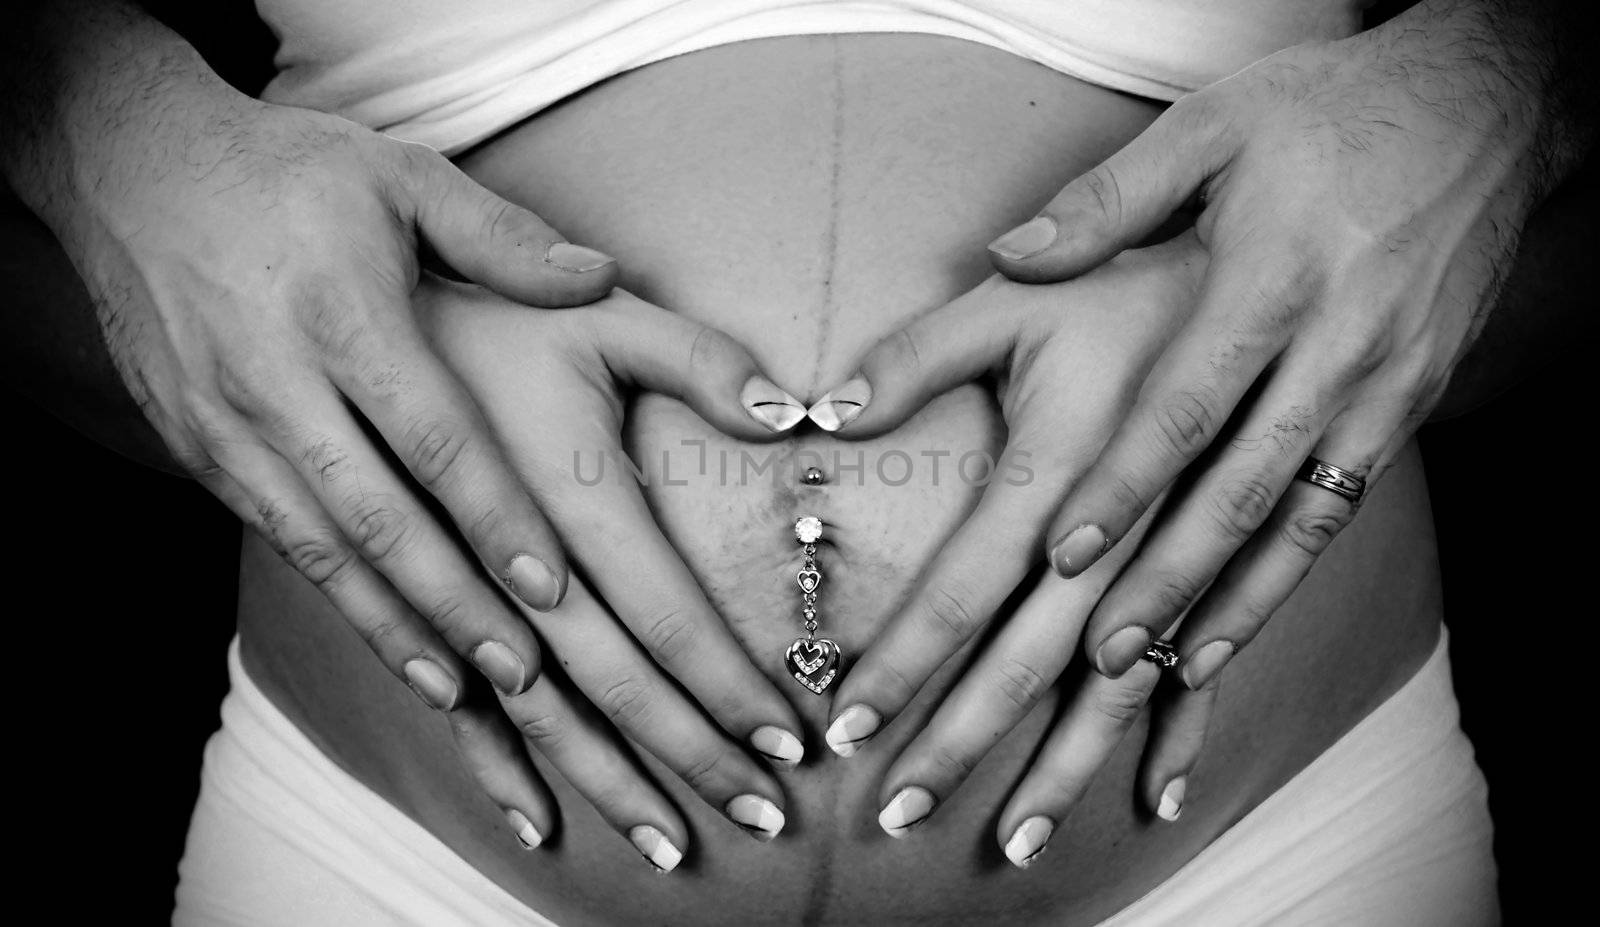 Young married couple making heart shapes with their hands over the woman's pregnant belly, beautiful love and family concept.